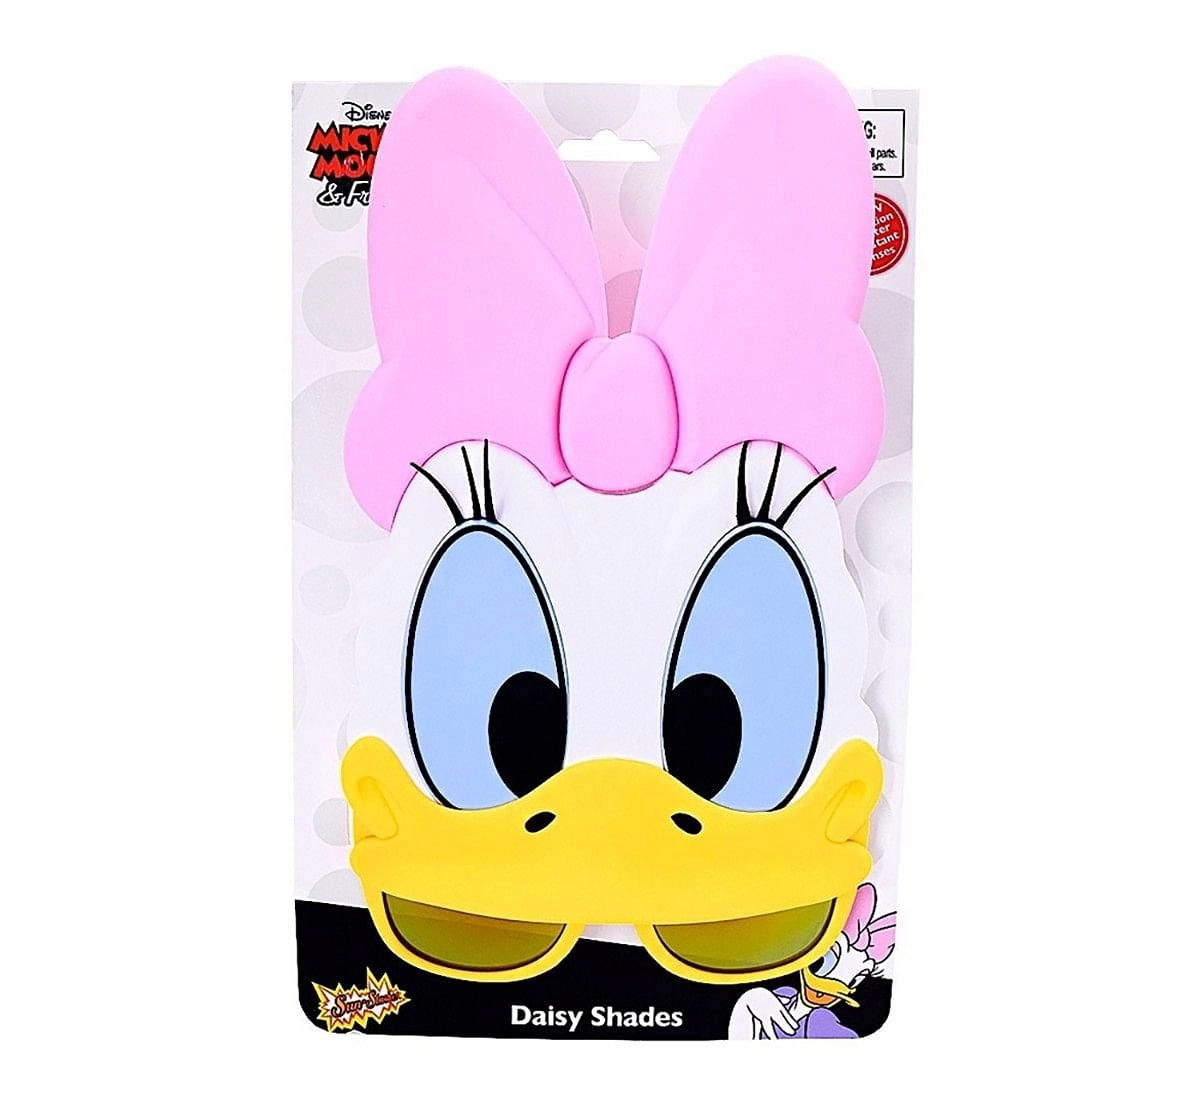 Disney Sunstaches Daisy Duck Sunglasses Shades Novelty Character Novelty for Kids age 12M+ 